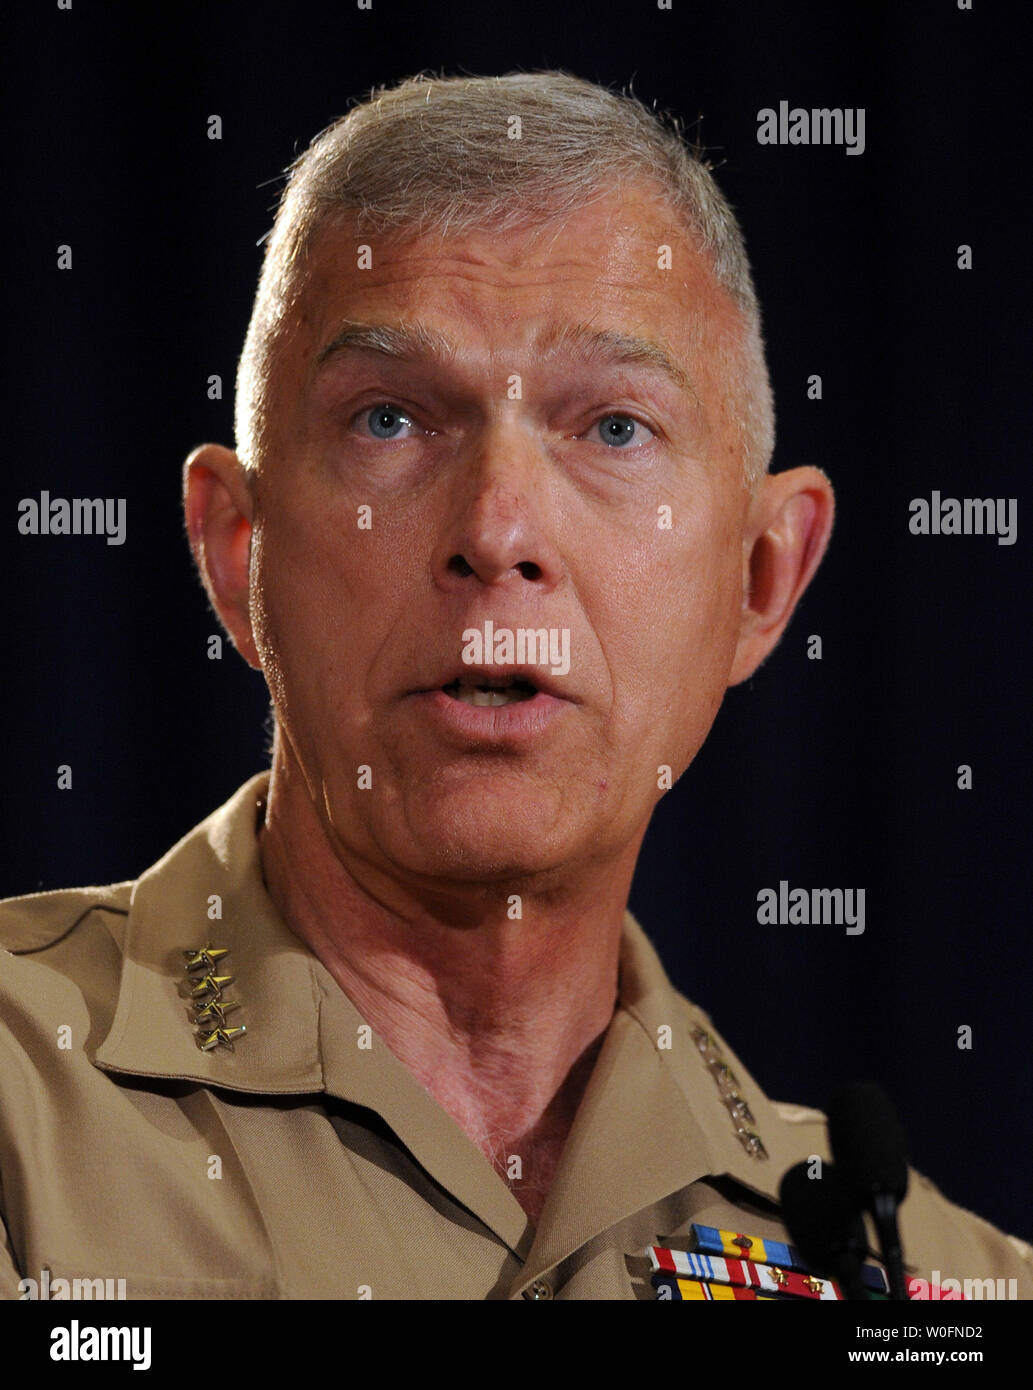 Gen. James Conway, Commandant of the U.S. Marine Corps, speaks during the Navy League Sea-Air-Space Exposition at National Harbor, Maryland, on May 3, 2010.   UPI/Roger L. Wollenberg Stock Photo